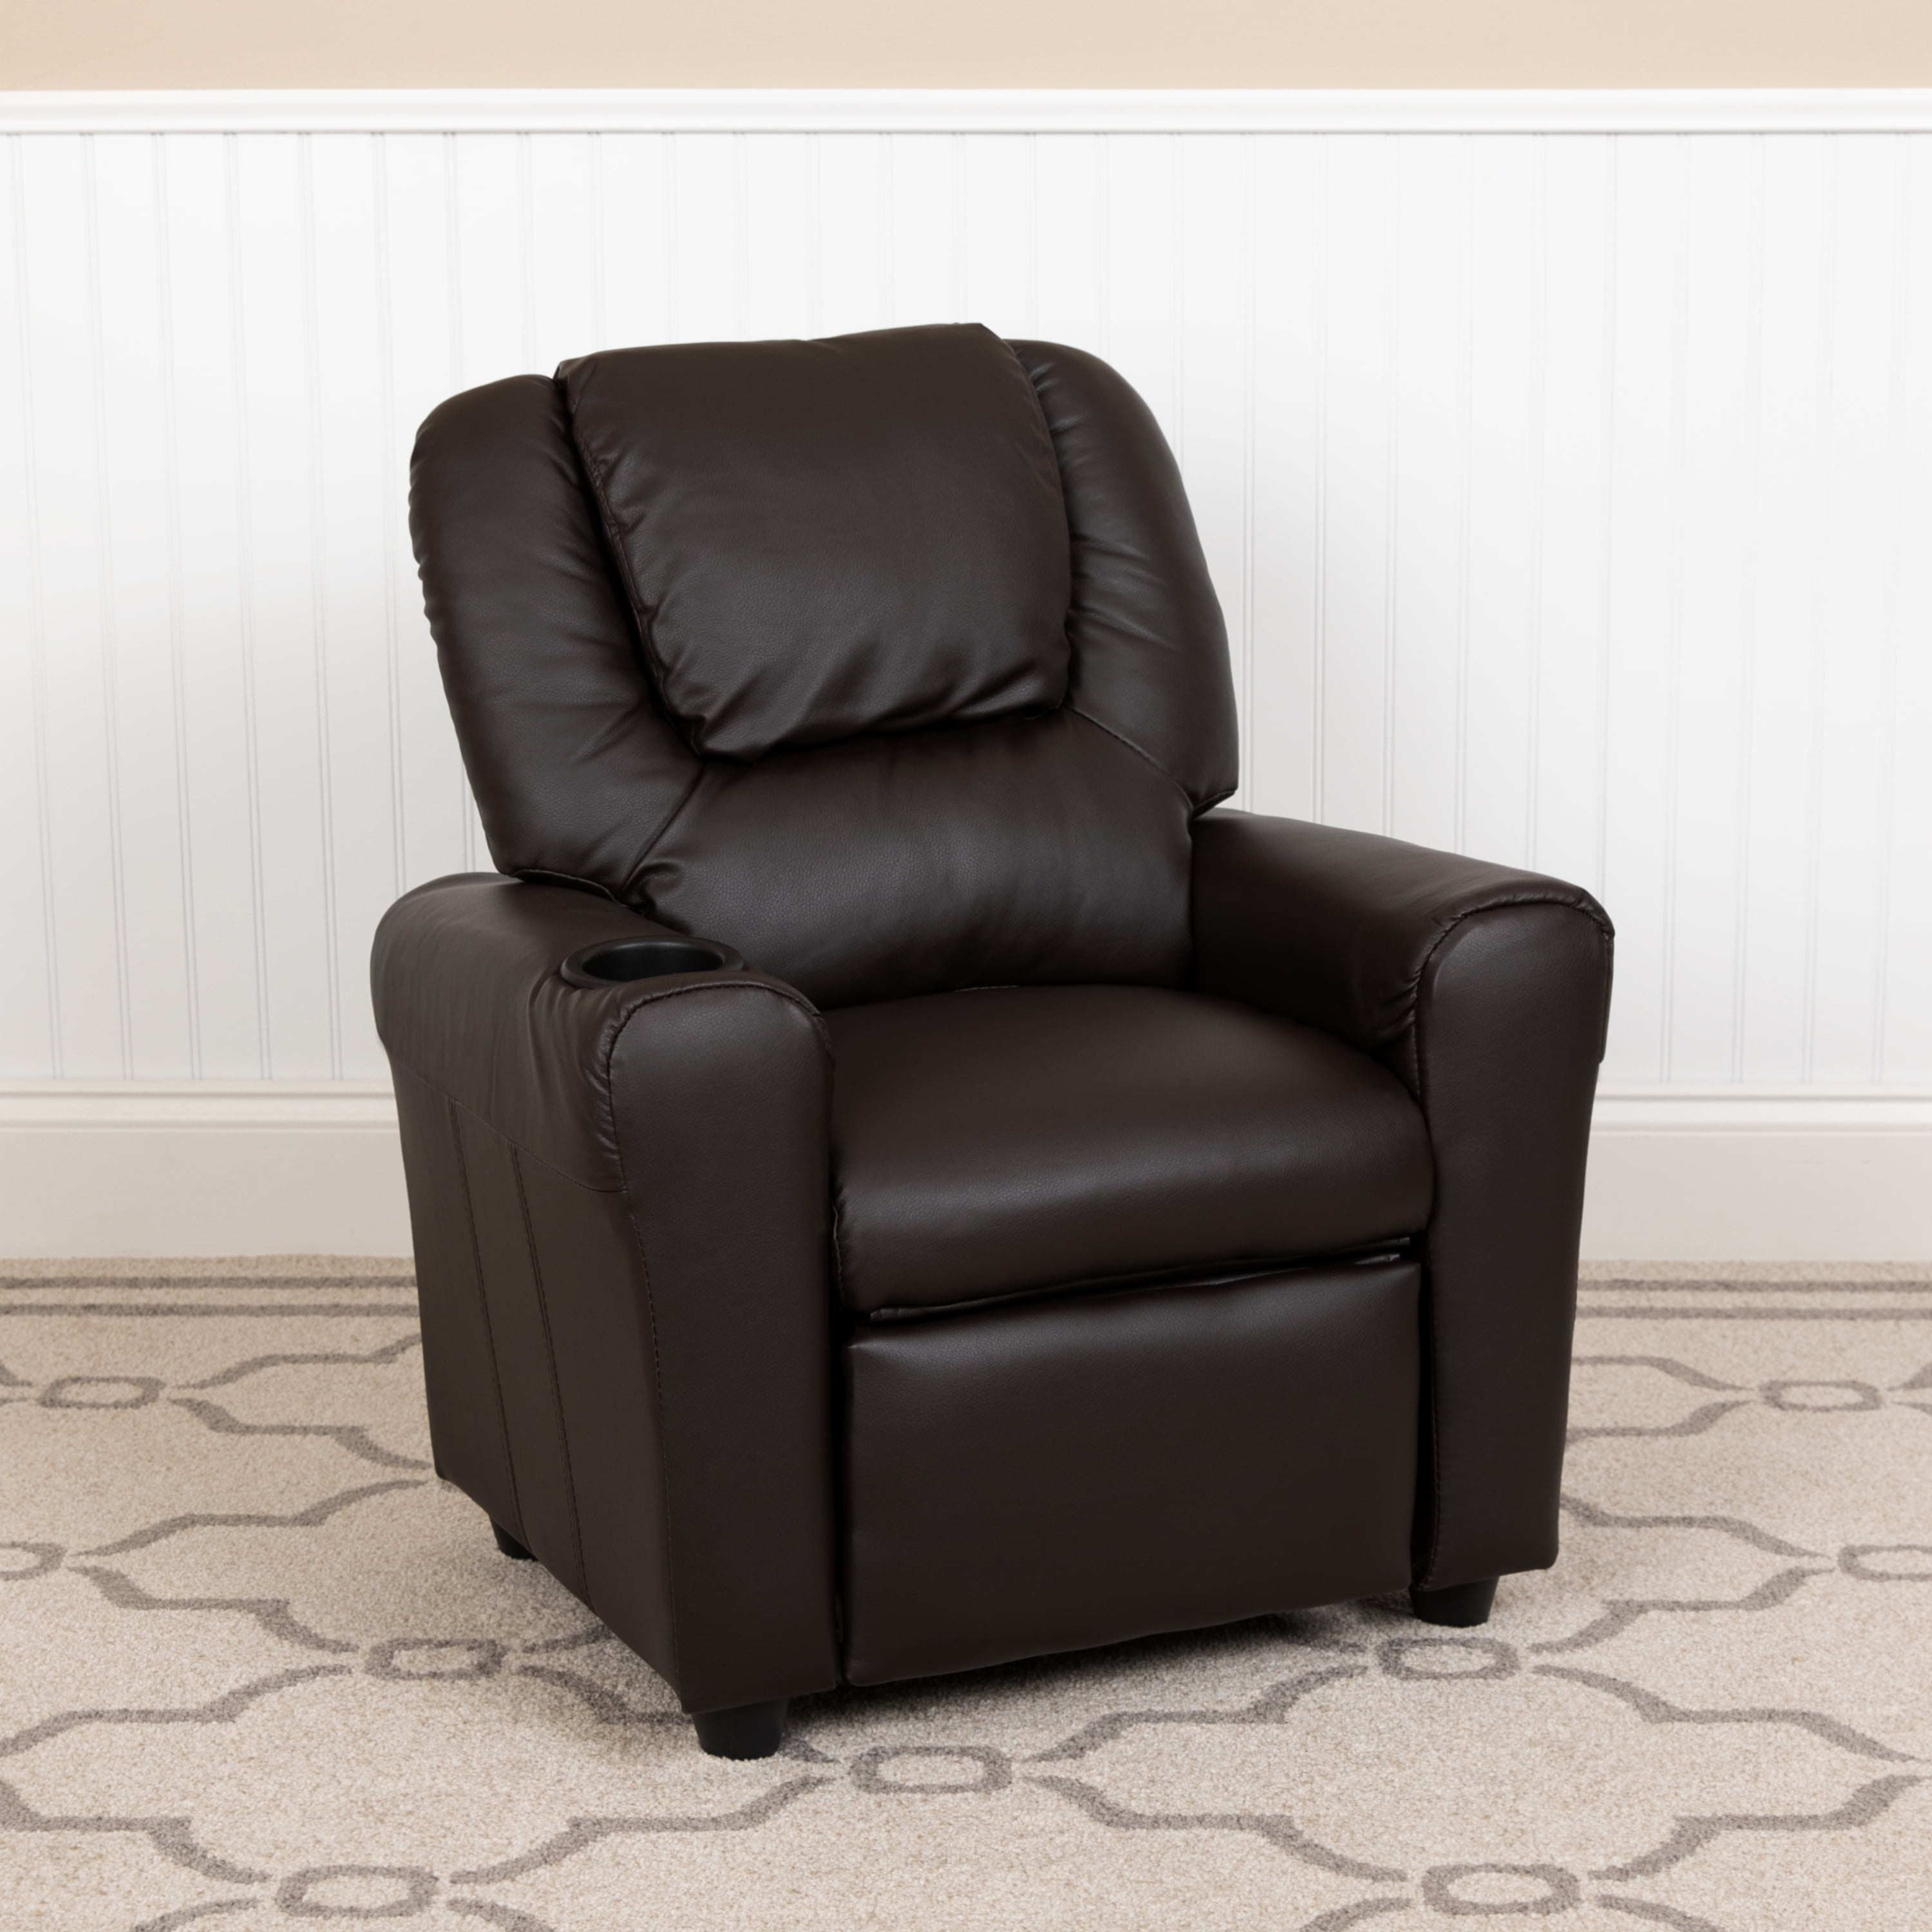 Flash Furniture Contemporary Brown, Leather Reclining Chair With Cup Holders